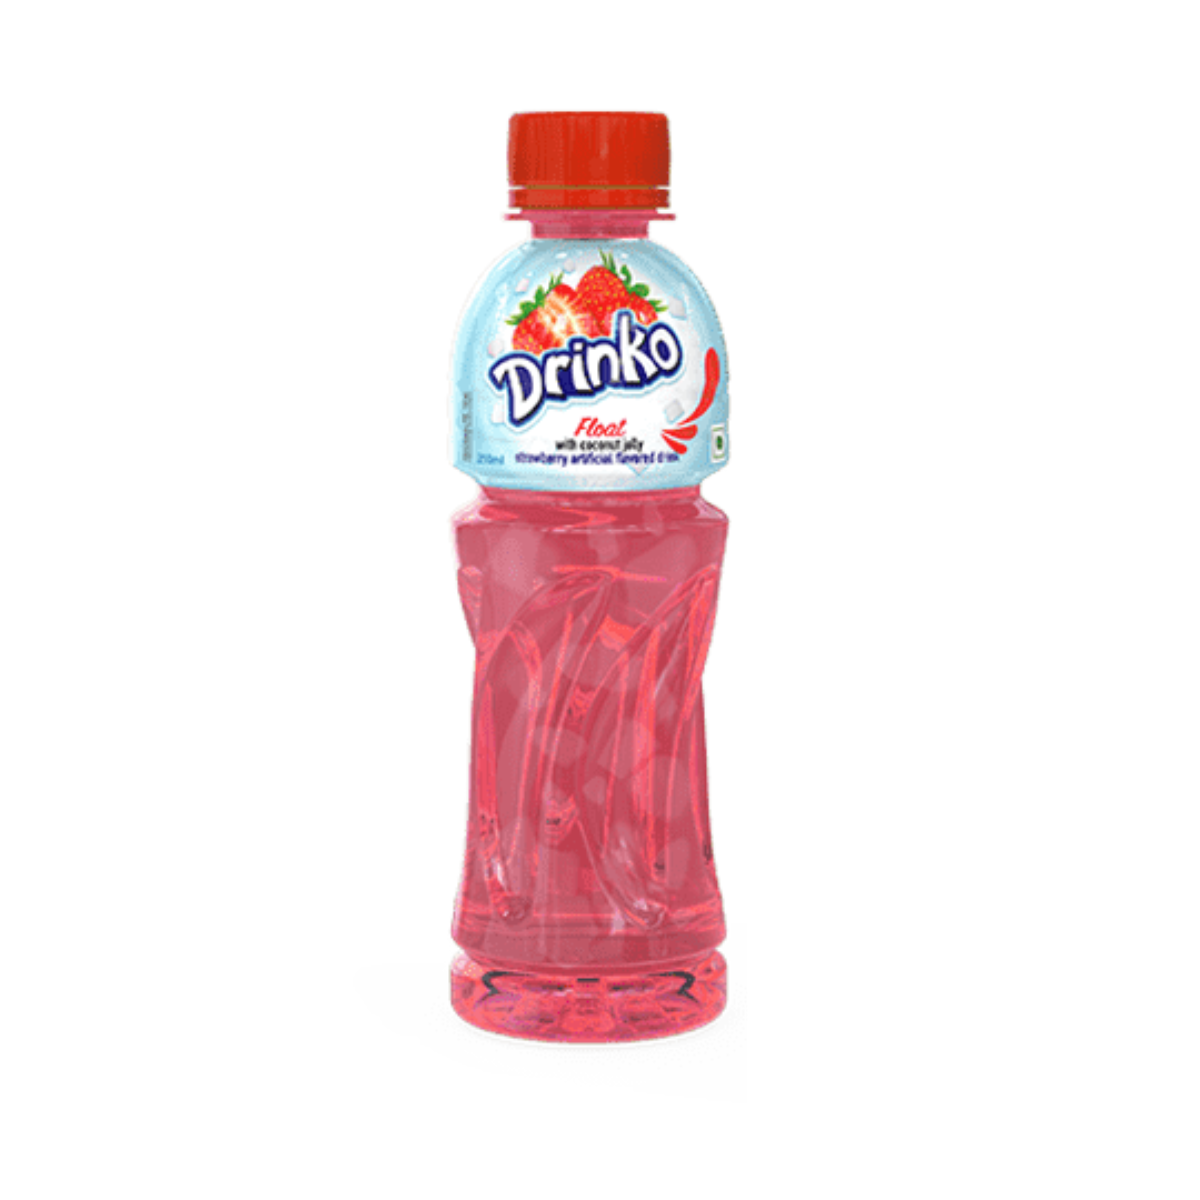 Drinko Float With Coconut Jell - Artificial Strawberry Flavored Drink - 250ml